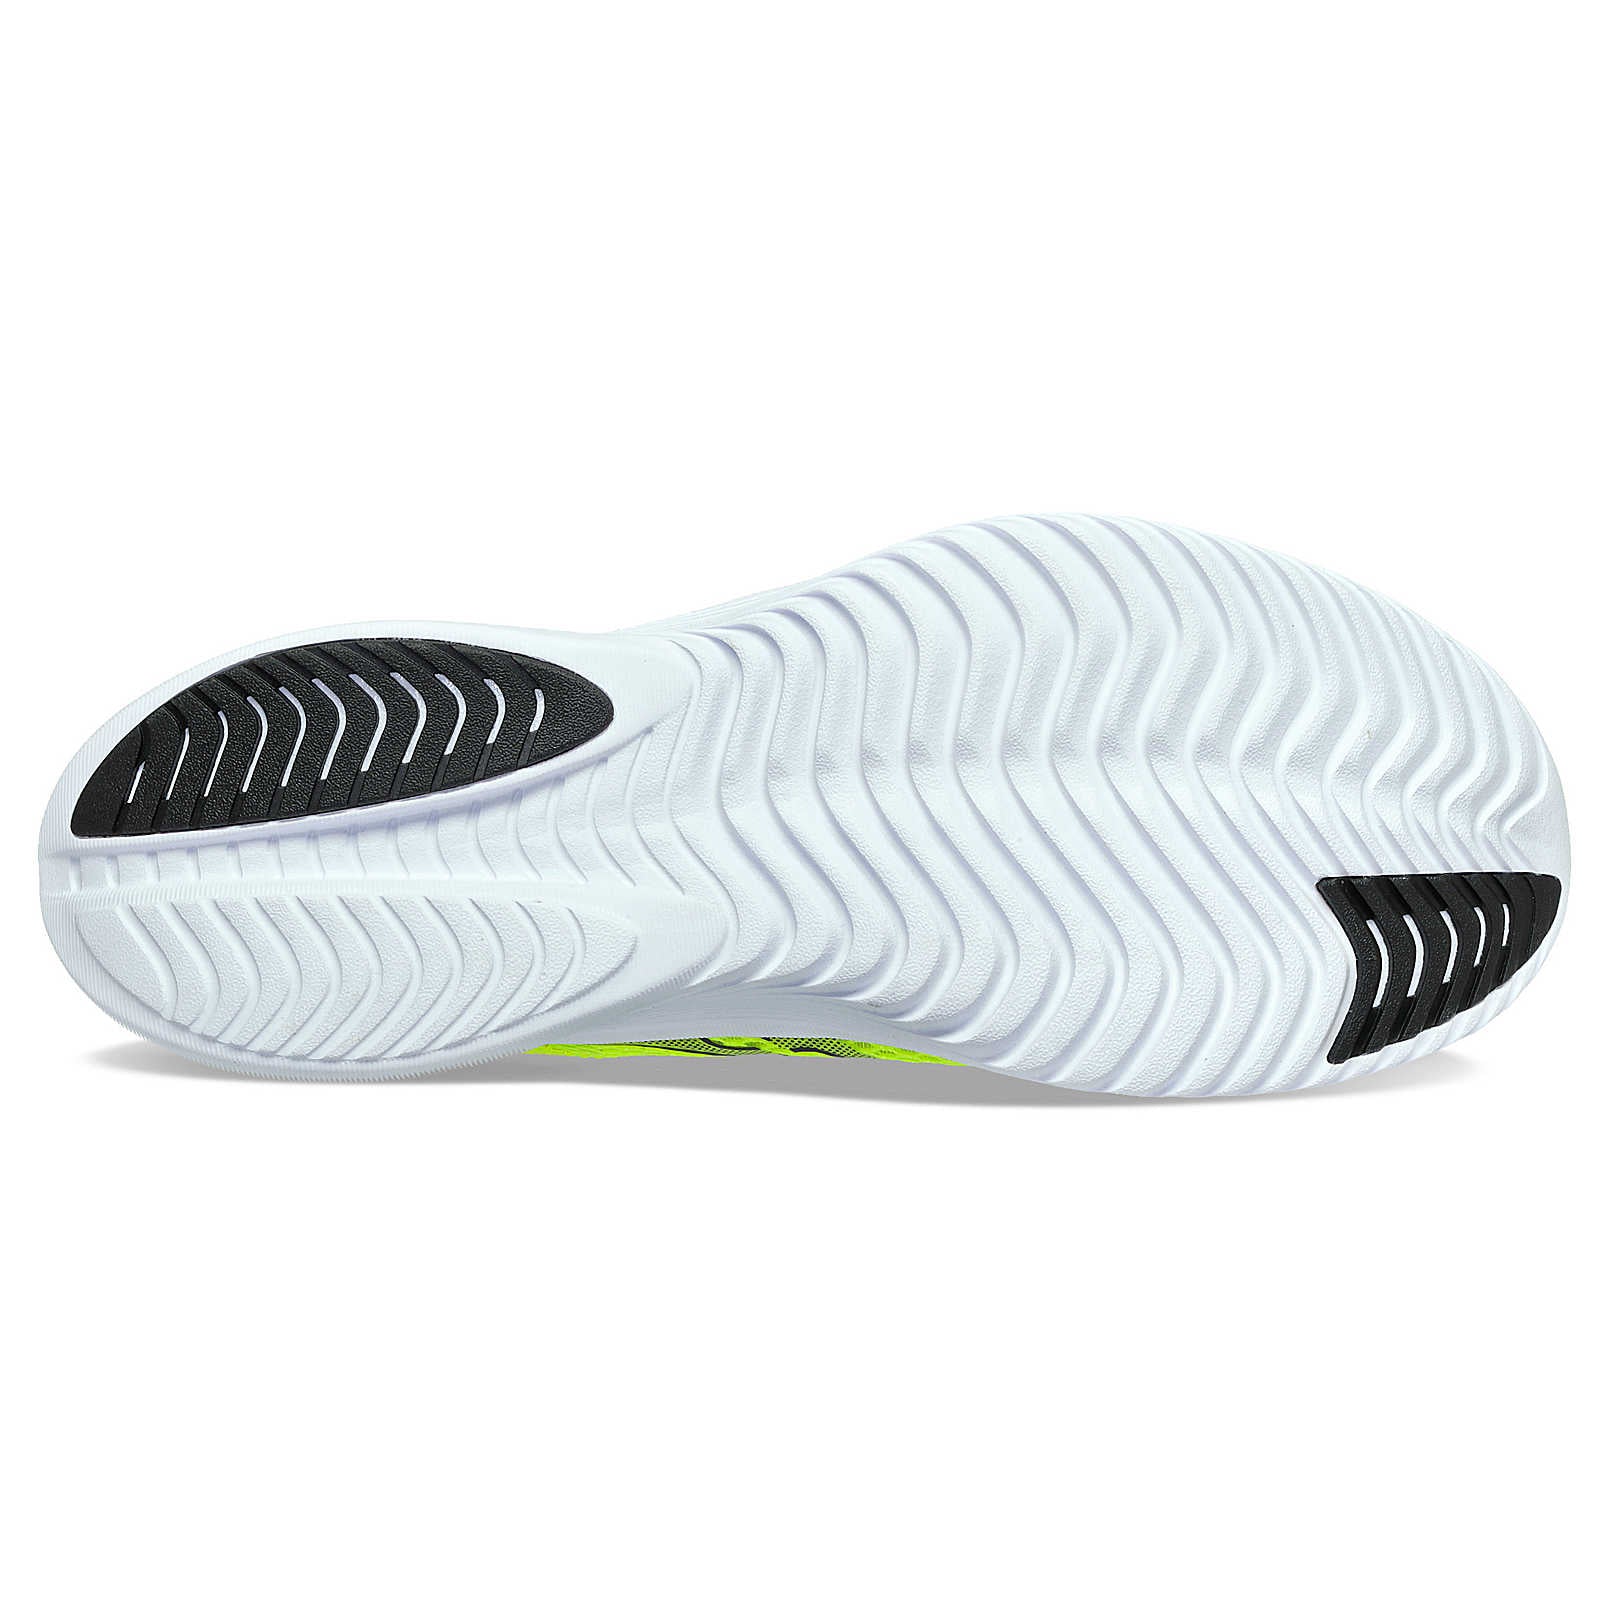 The outsole of teh kinvara 14 has a small amount of carbon rubber on the heel and a bit more under the big toe